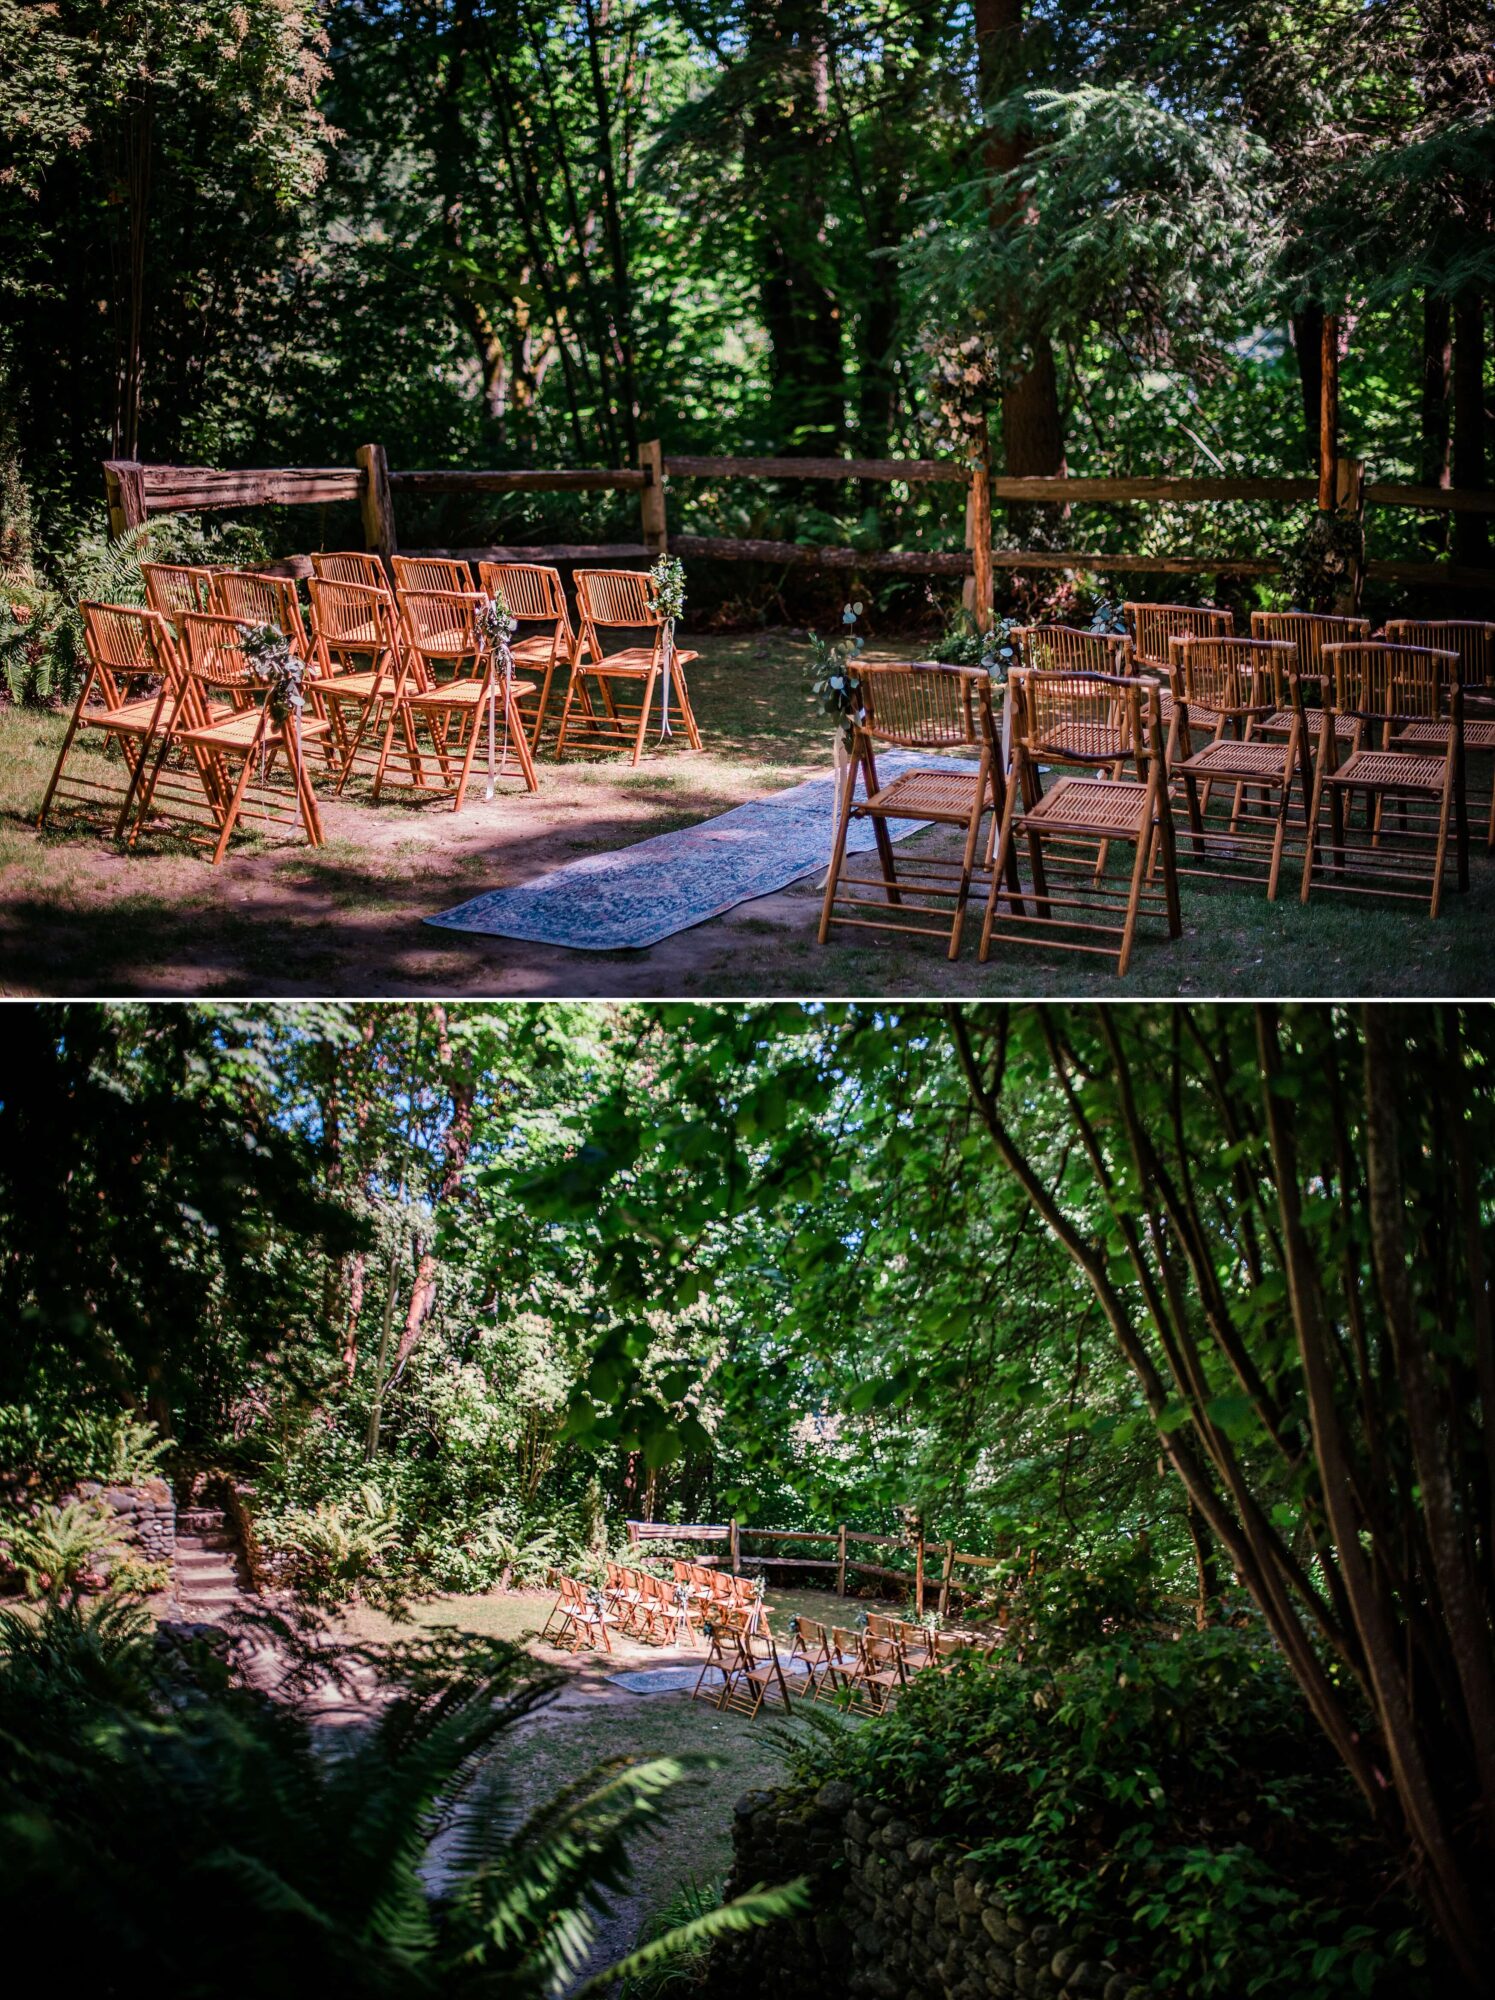 Grotto wedding ceremony site at St. Edward Park in Kenmore, Washington State, outside Seattle